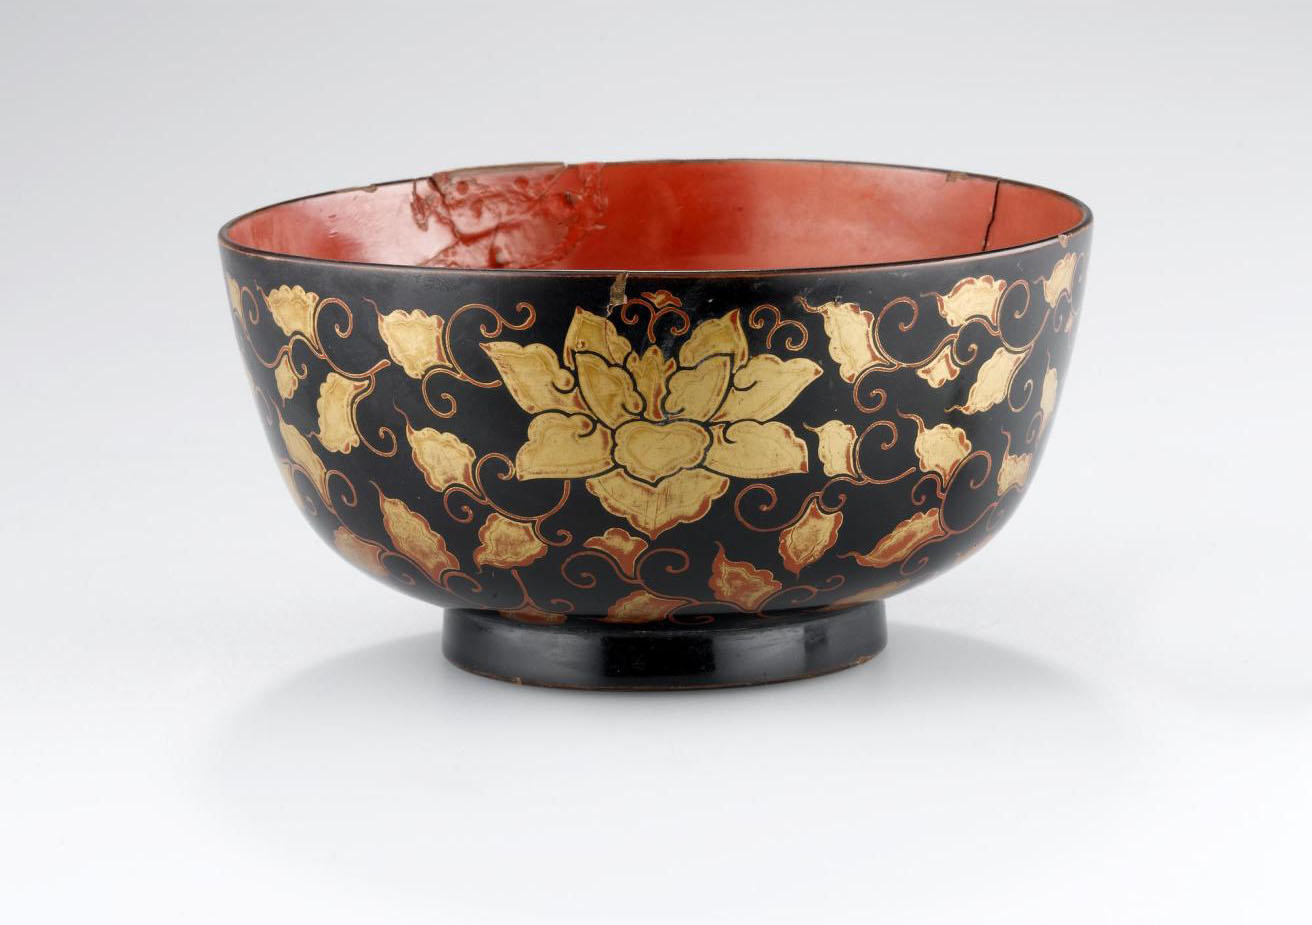 19th century cup made from wood decorated with black and red lacquer. Cup and stand sets (tuki) of Japanese lacquer were used by the Ainu in ceremonies. On display in the Living Lands gallery, National Museum of Scotland.